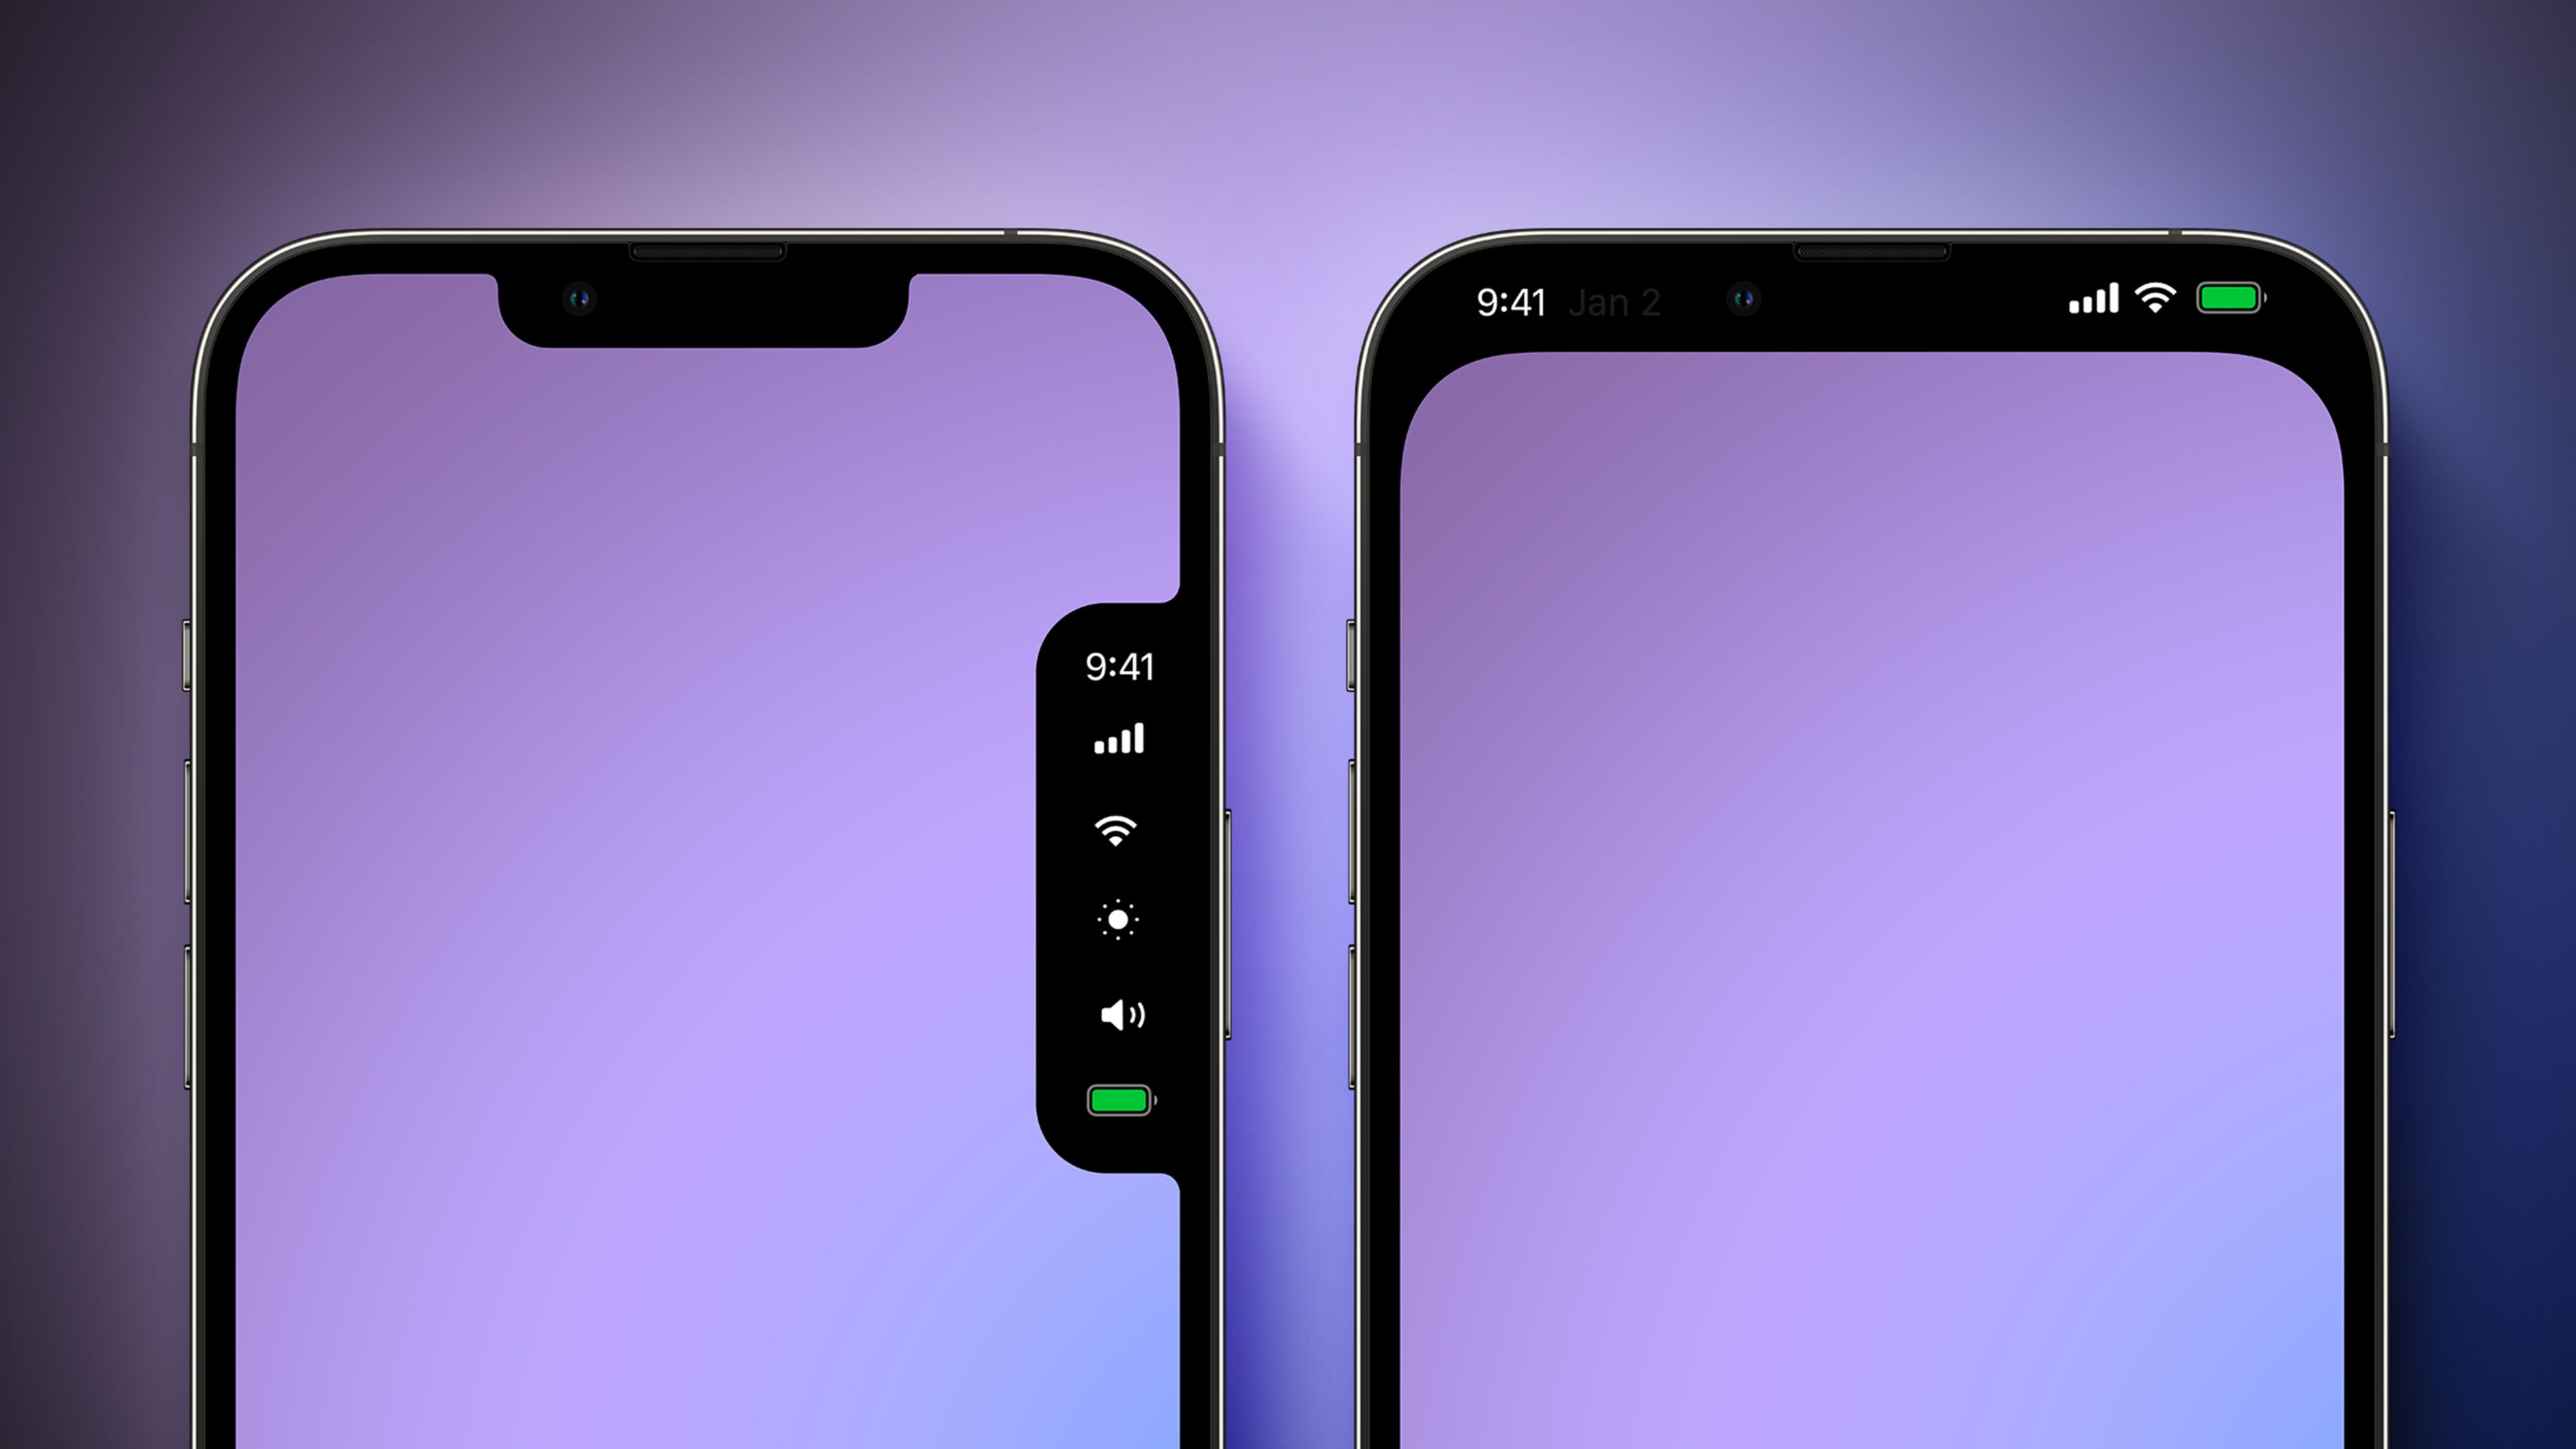 Apple Explored These Notch and Dynamic Island Designs for iPhones - macrumors.com